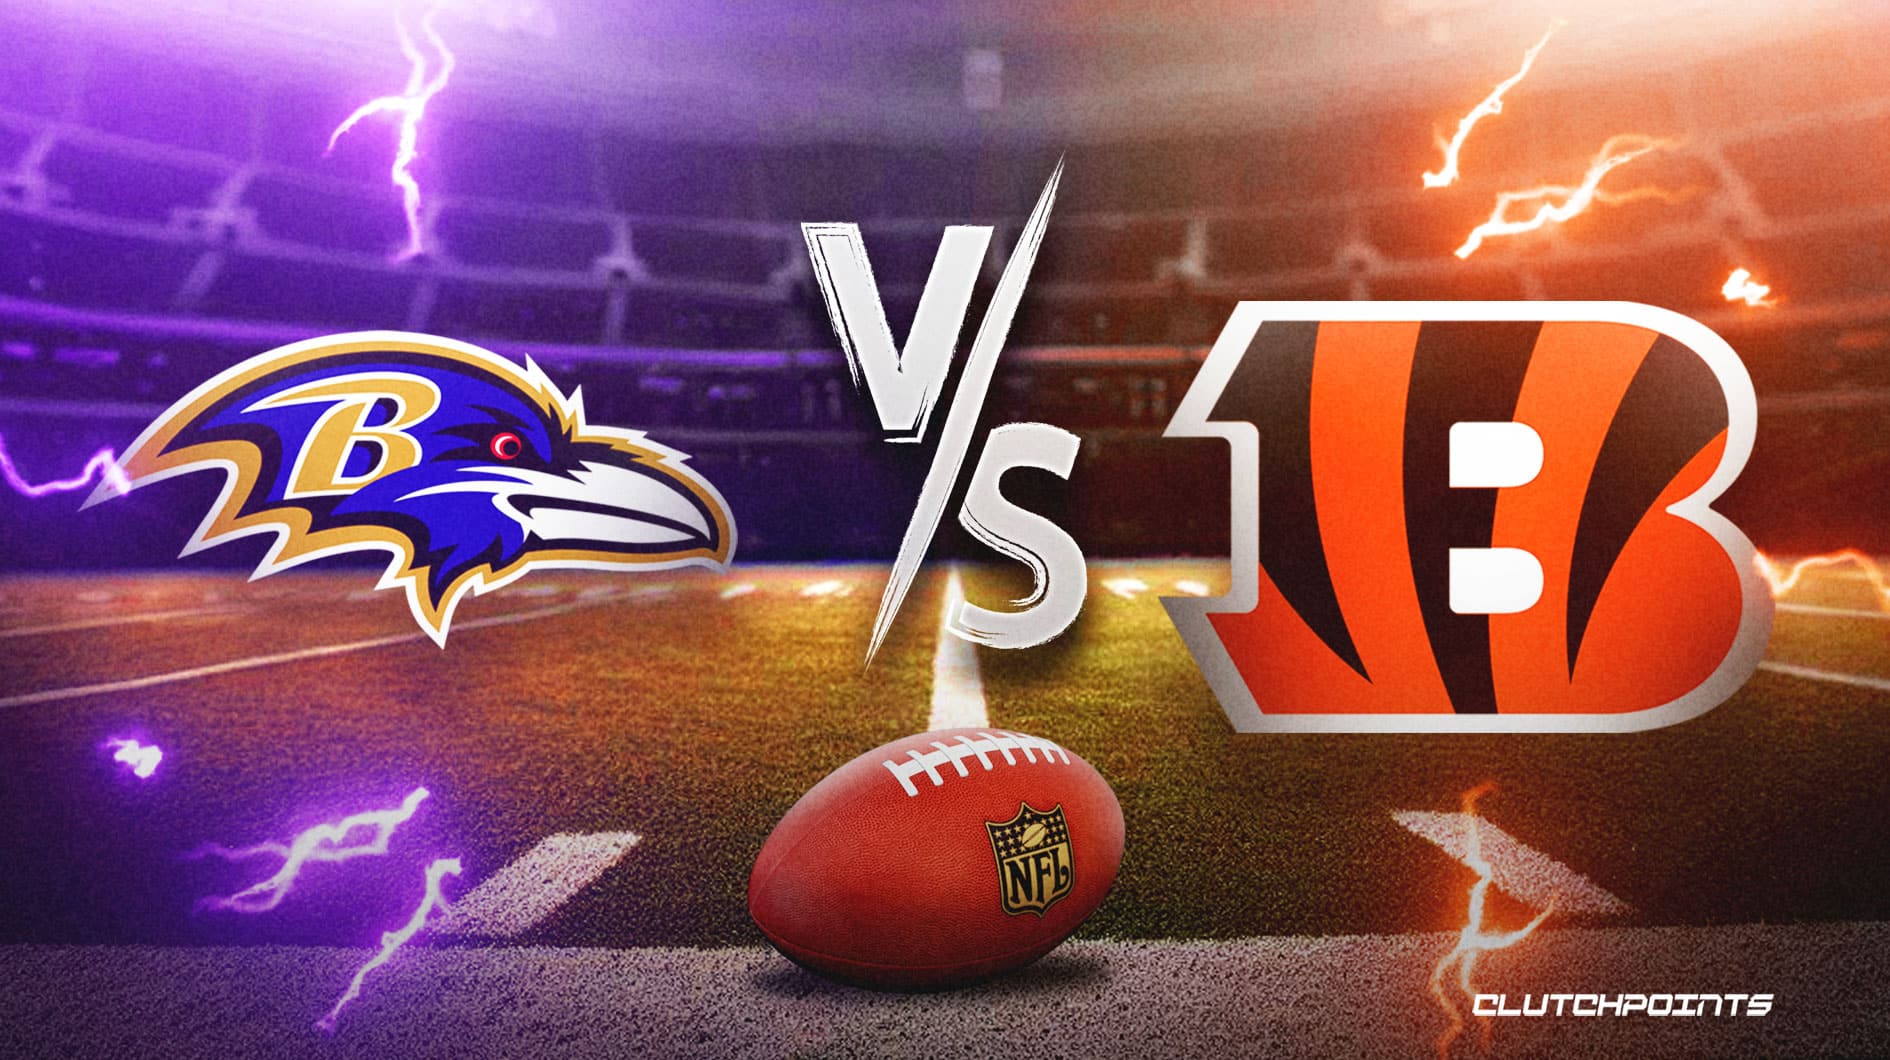 Ravens vs. Bengals: How to watch, listen and stream Week 2